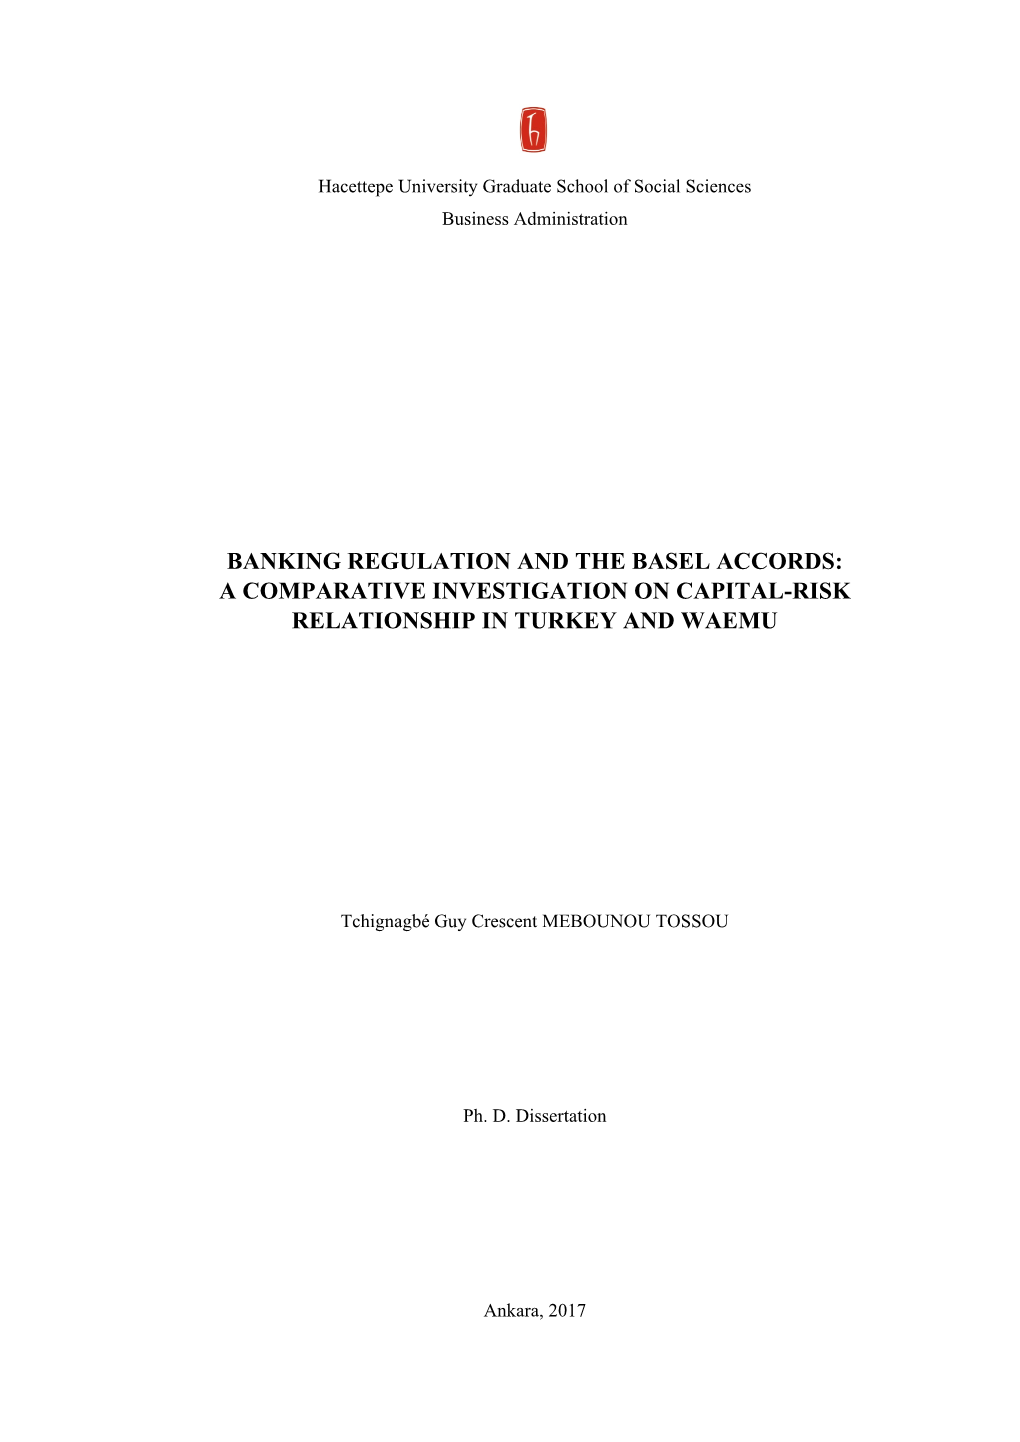 Banking Regulation and the Basel Accords: a Comparative Investigation on Capital-Risk Relationship in Turkey and Waemu